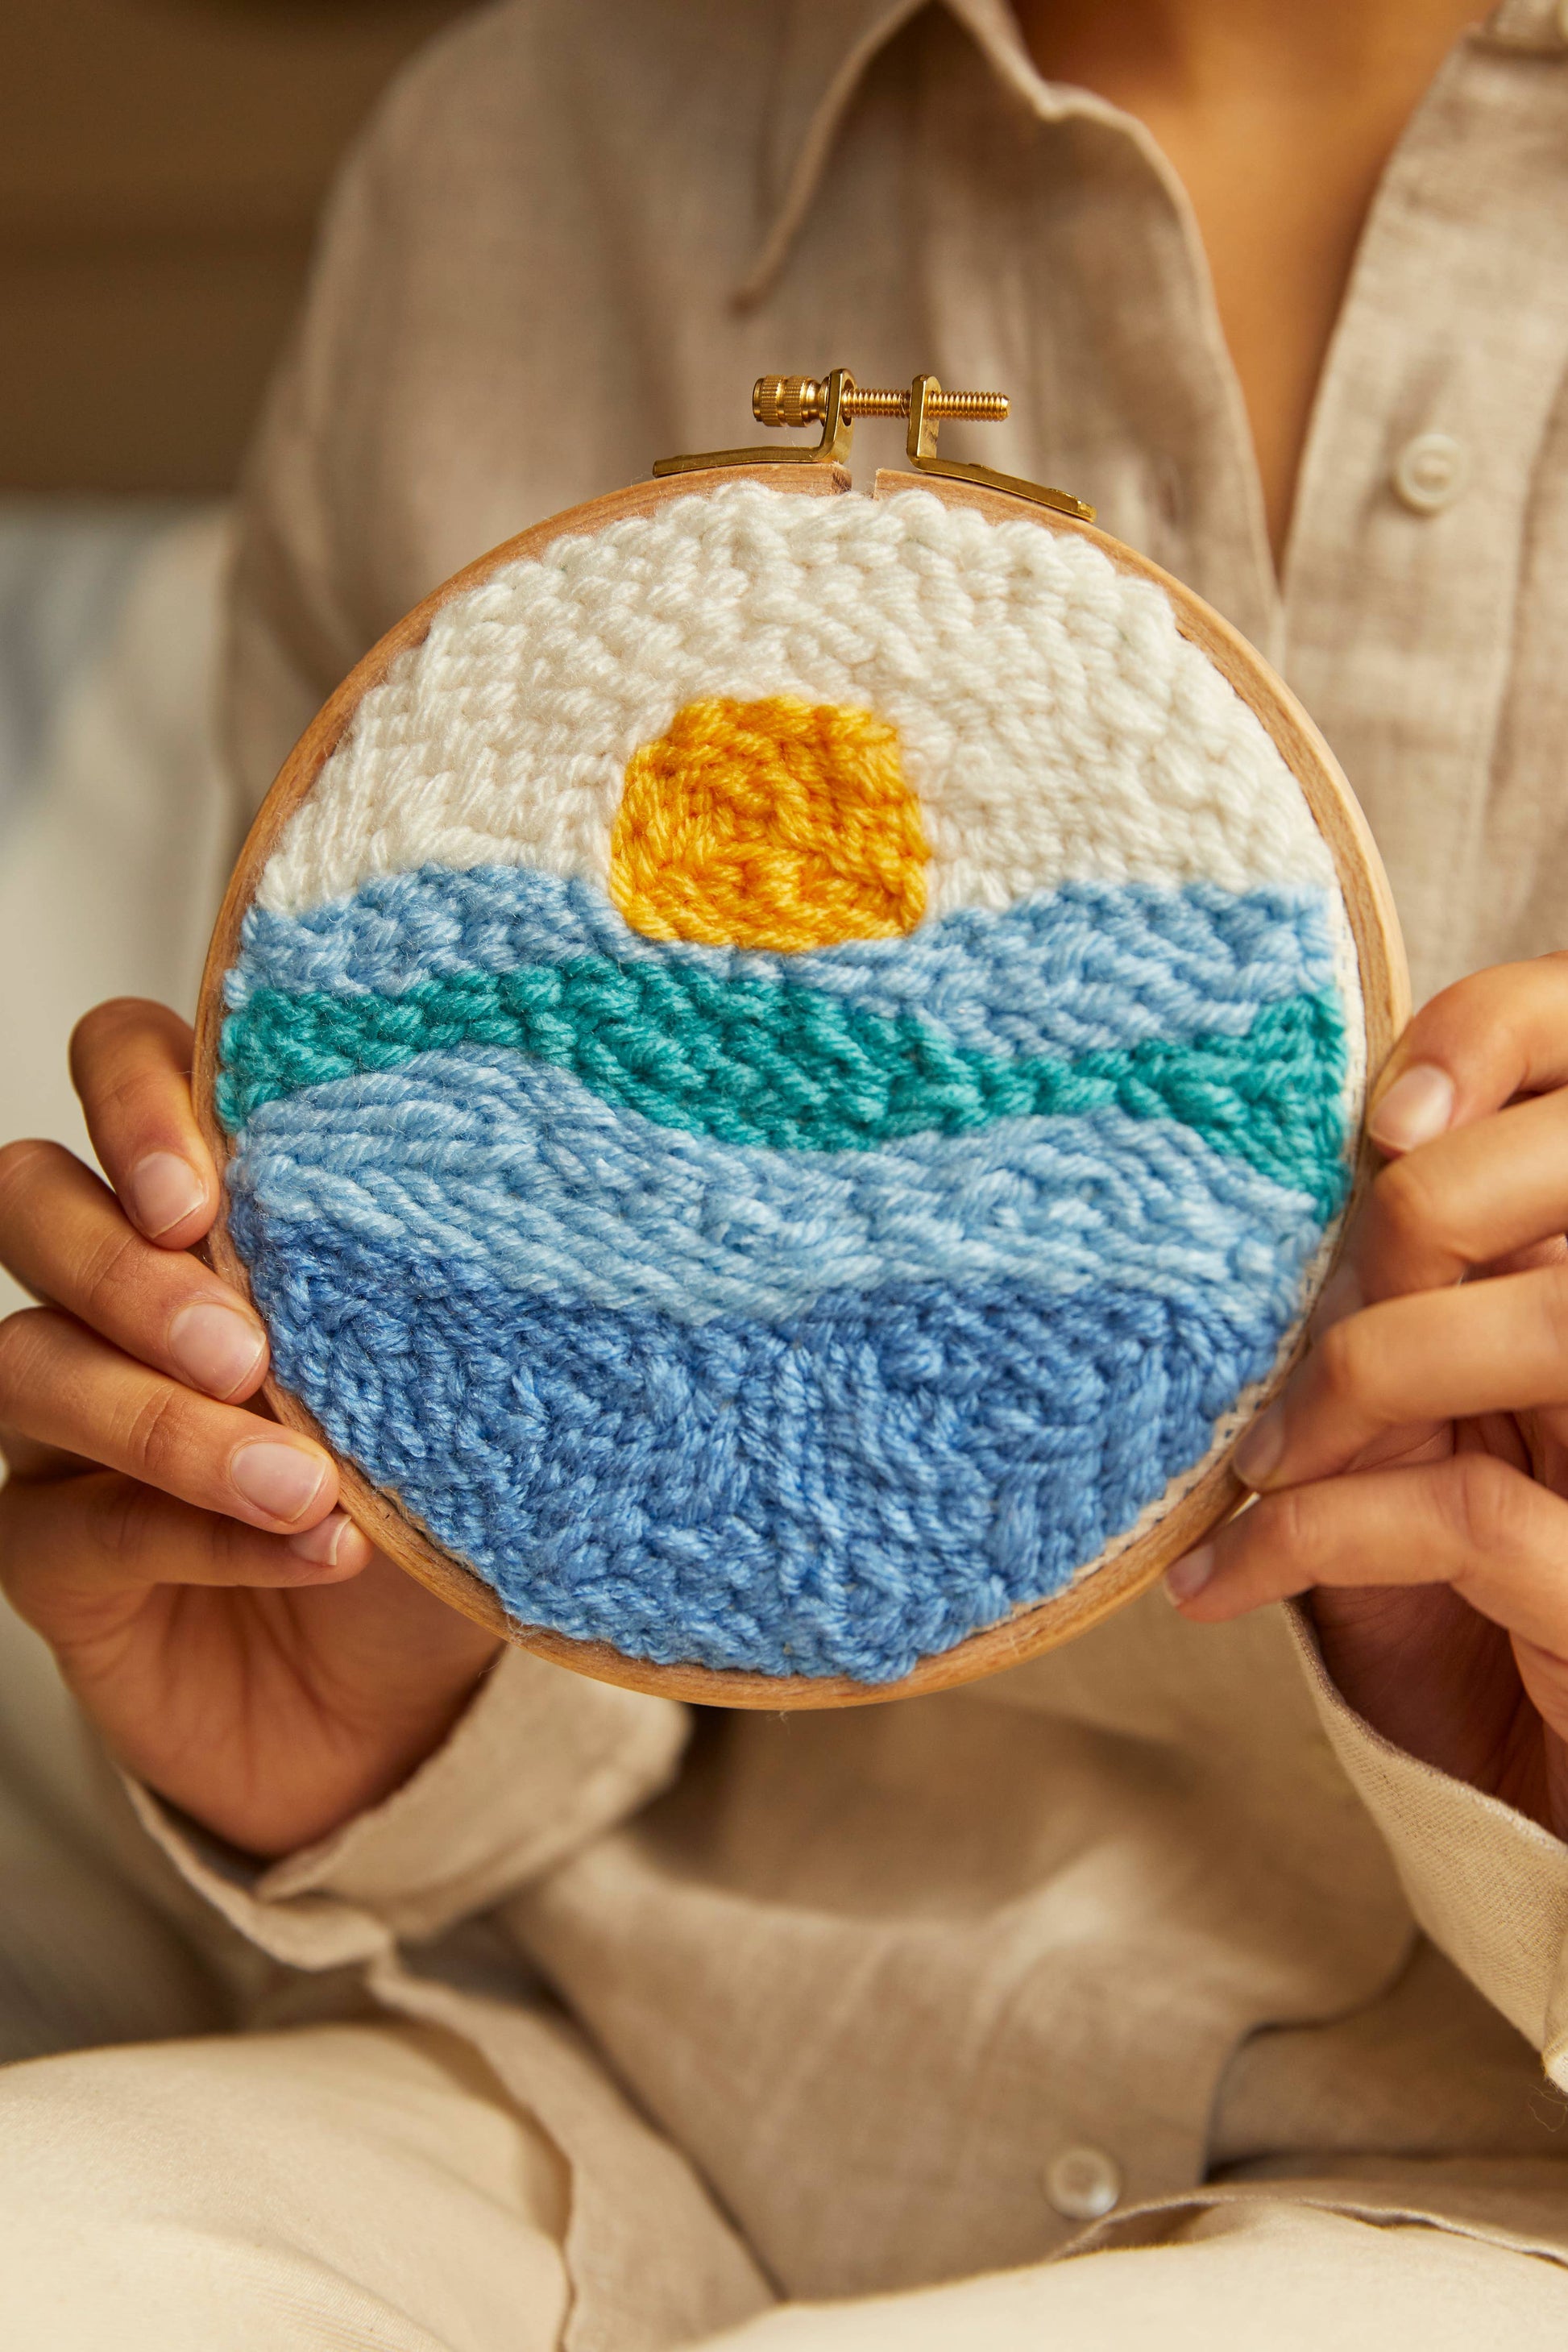 Embroidery hoop with embroidered design of sunset and water